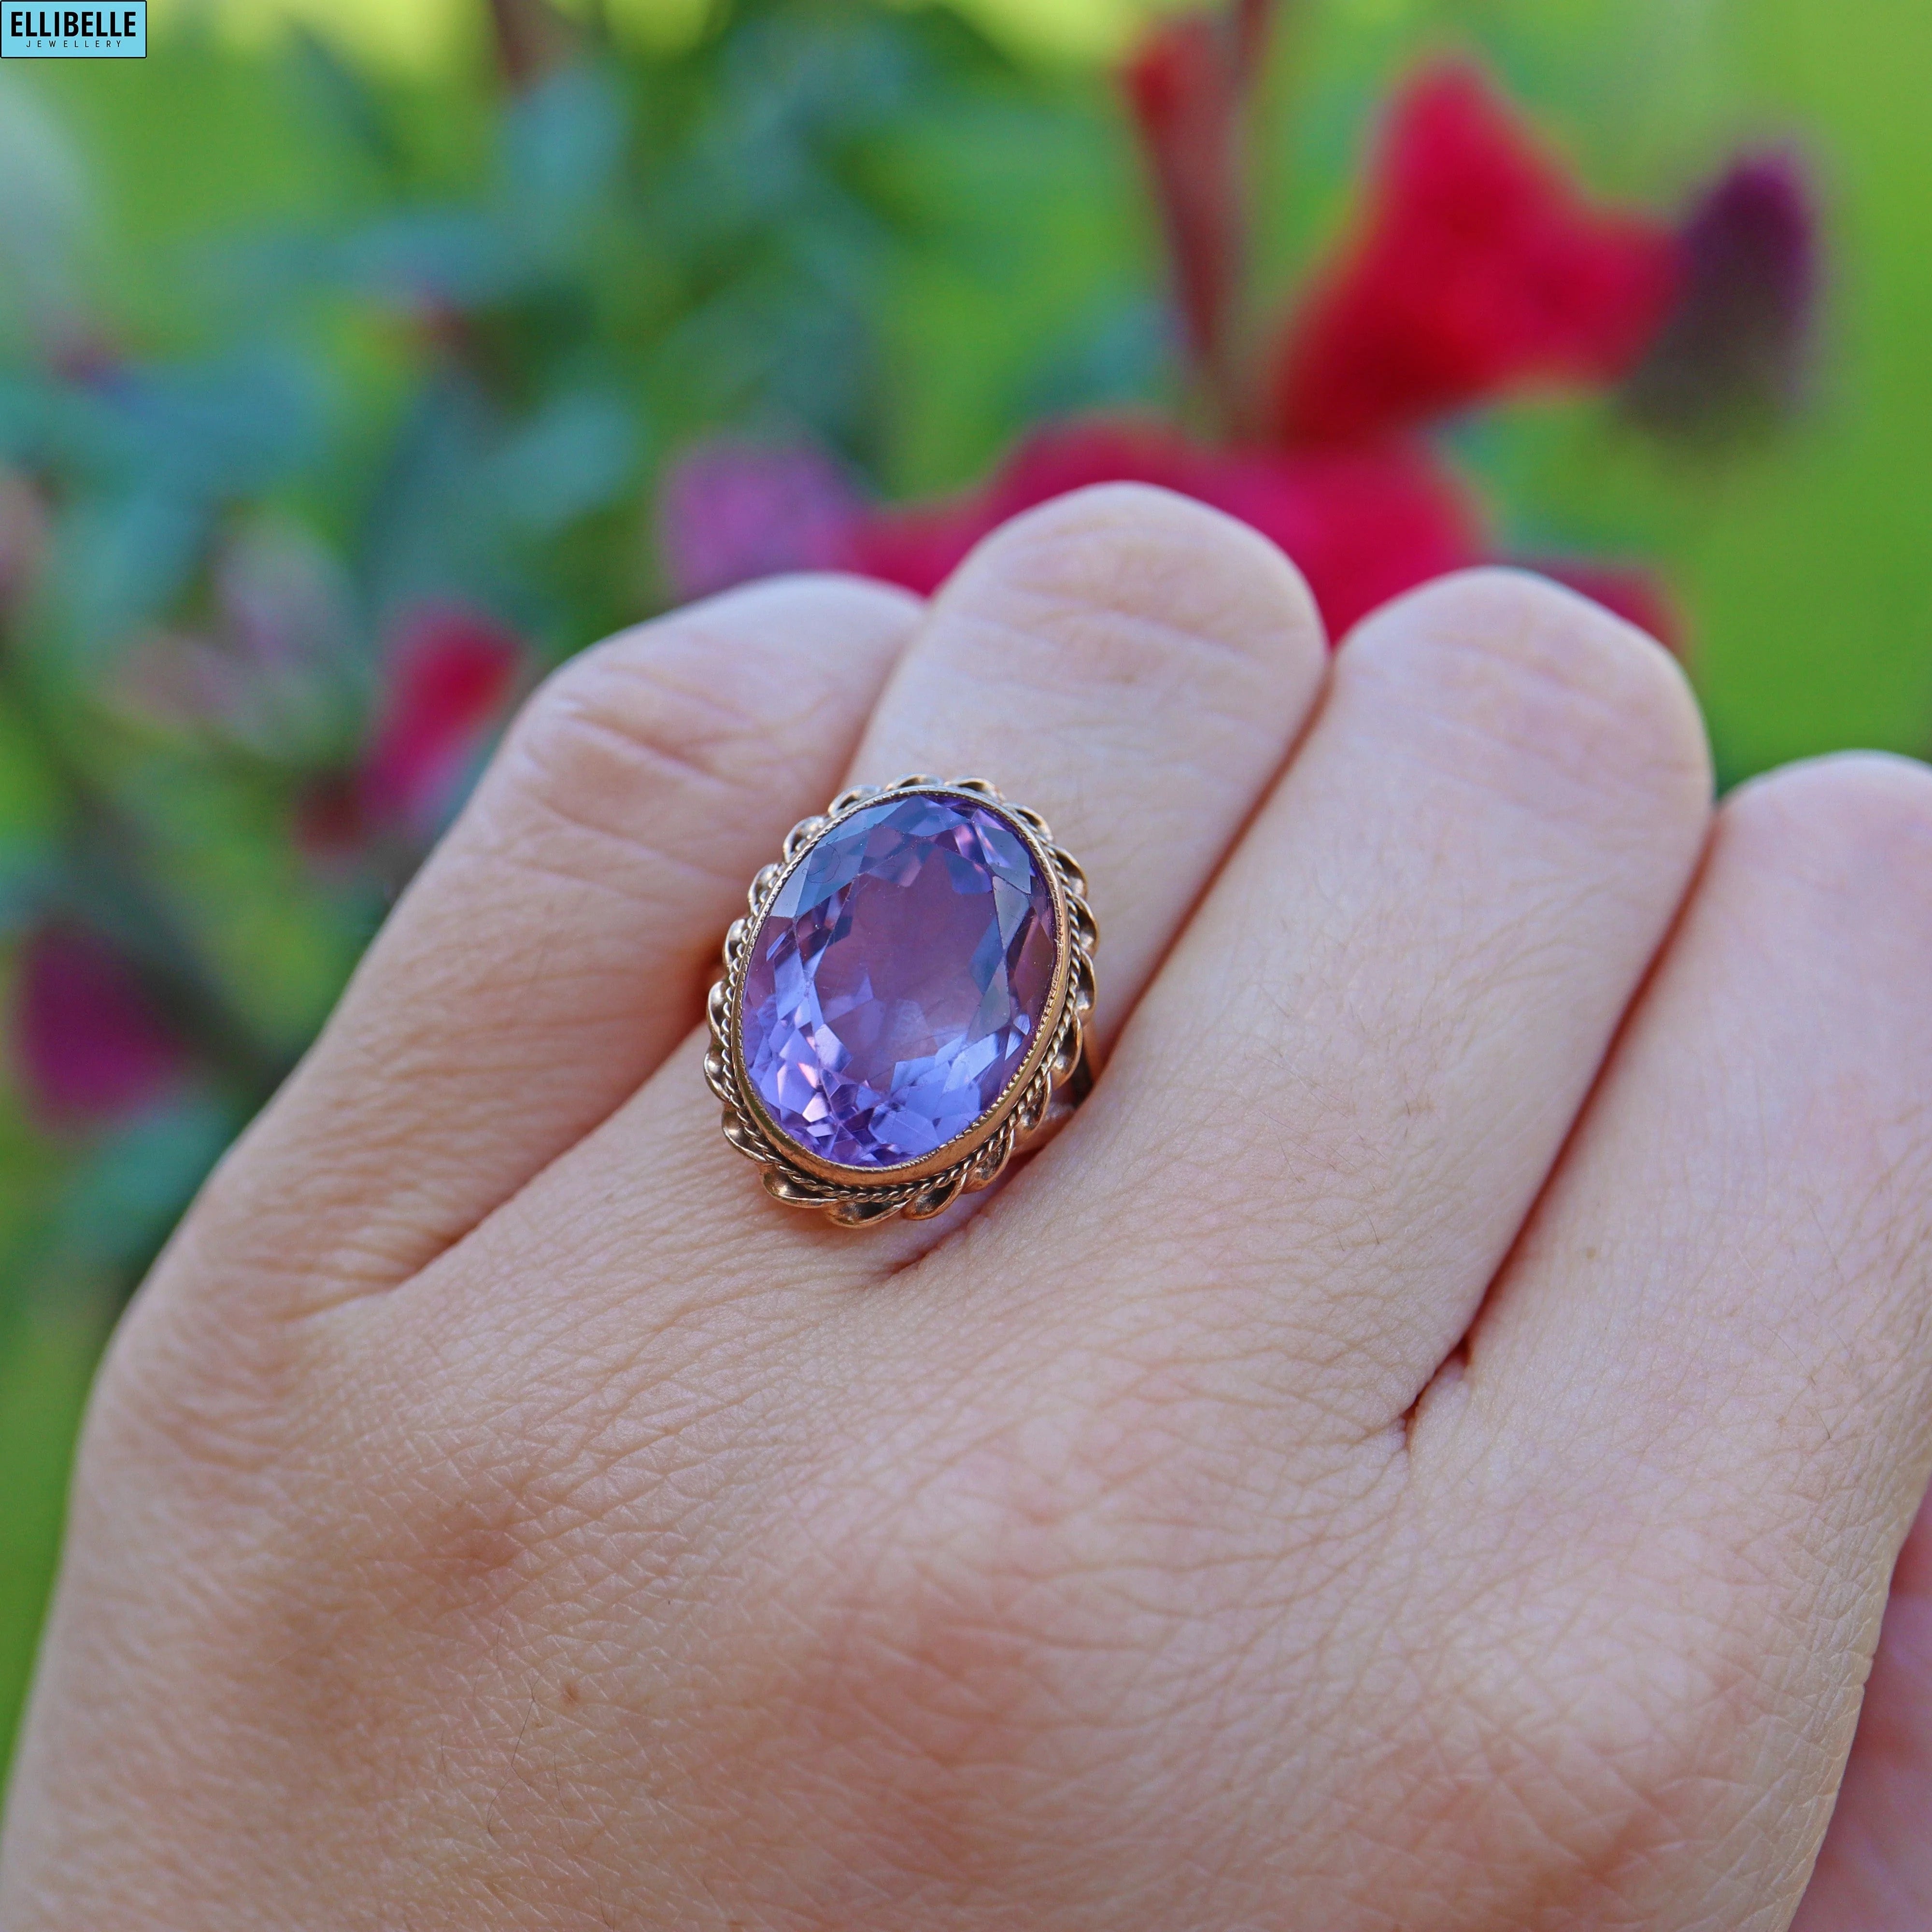 VINTAGE AMETHYST 9CT GOLD SOLITAIRE RING